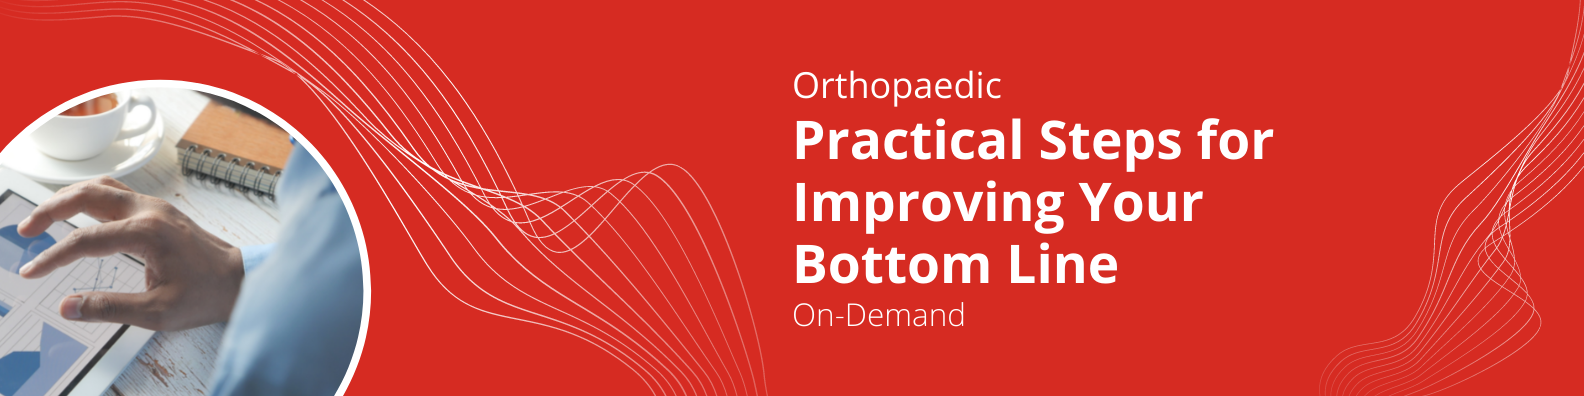 On-Demand - Practical Steps for Improving Your Bottom Line (AAOS)